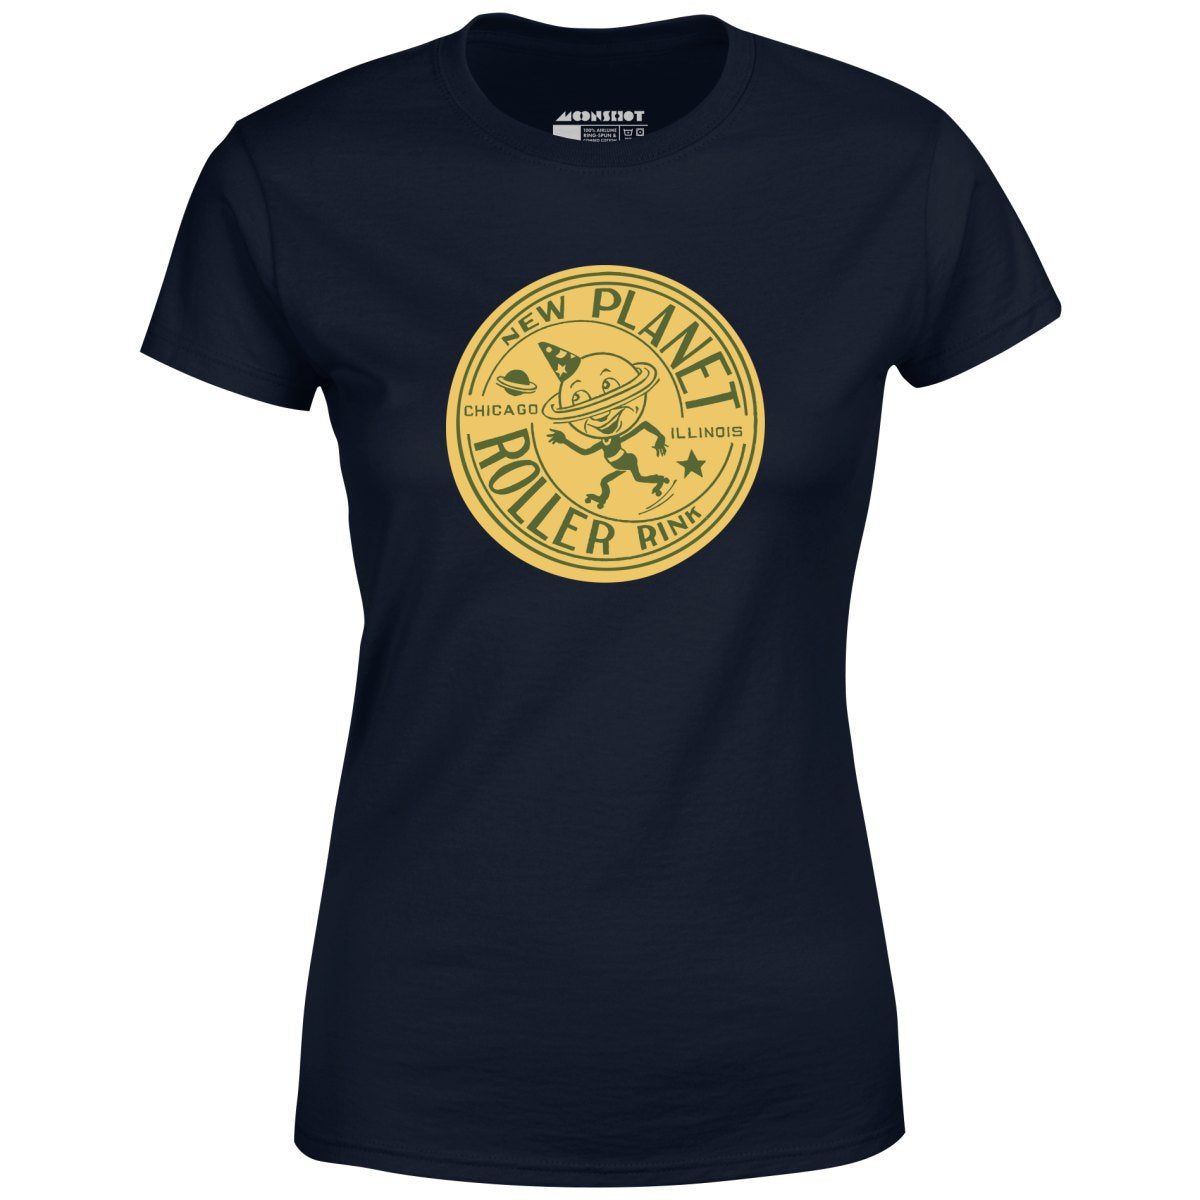 New Planet - Chicago, IL - Vintage Roller Rink - Women's T-Shirt